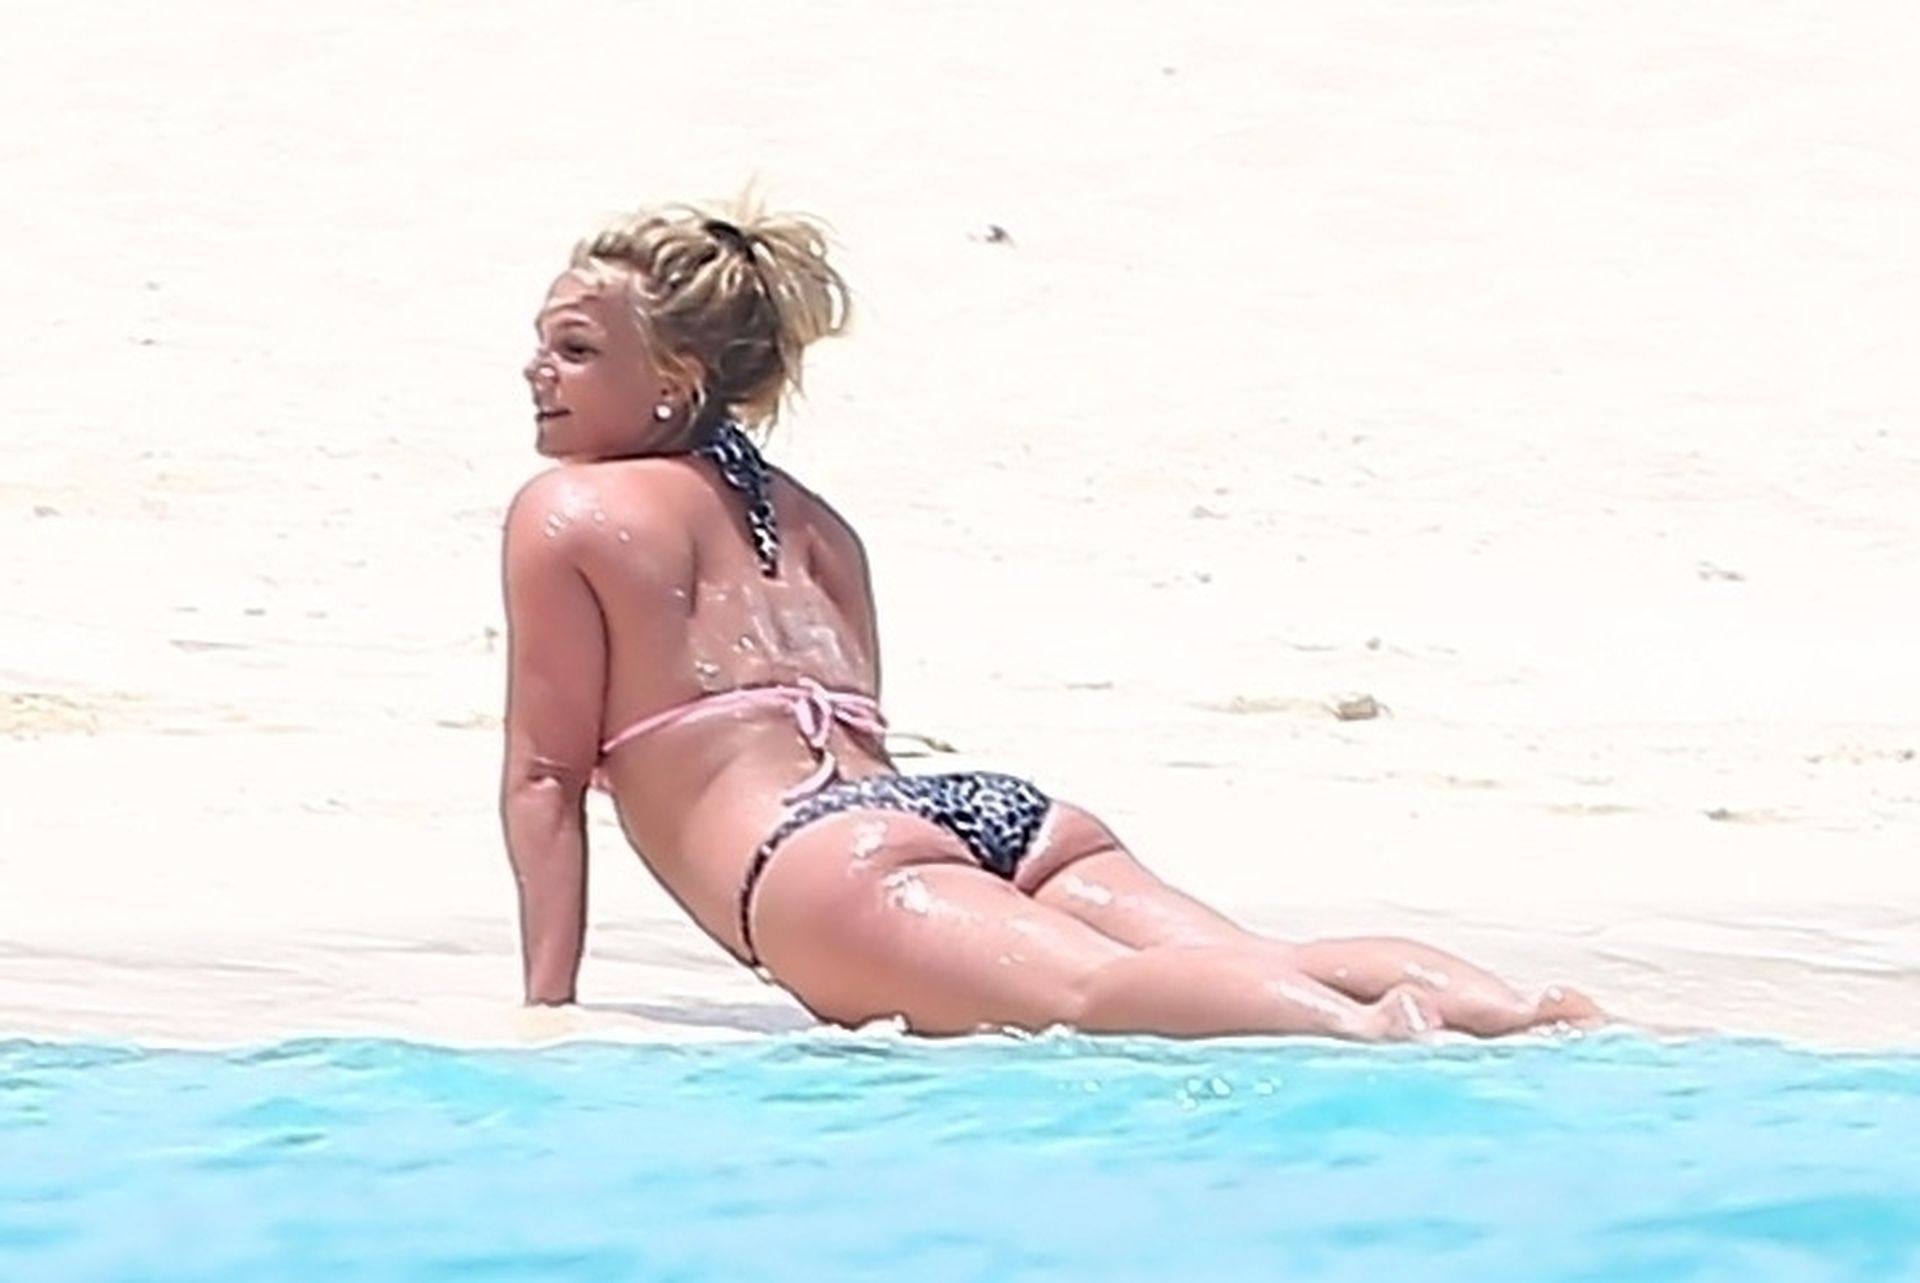 valse Lederen prosa HotCelebsTube on Twitter: "Britney Spears shows off her hot milf body on  the beach in Turks and Caicos. Sexy Singer wears pink two-piece bikini with  leopard trim on beach. #BritneySpears ➡ https://t.co/T0z2bN9WWK